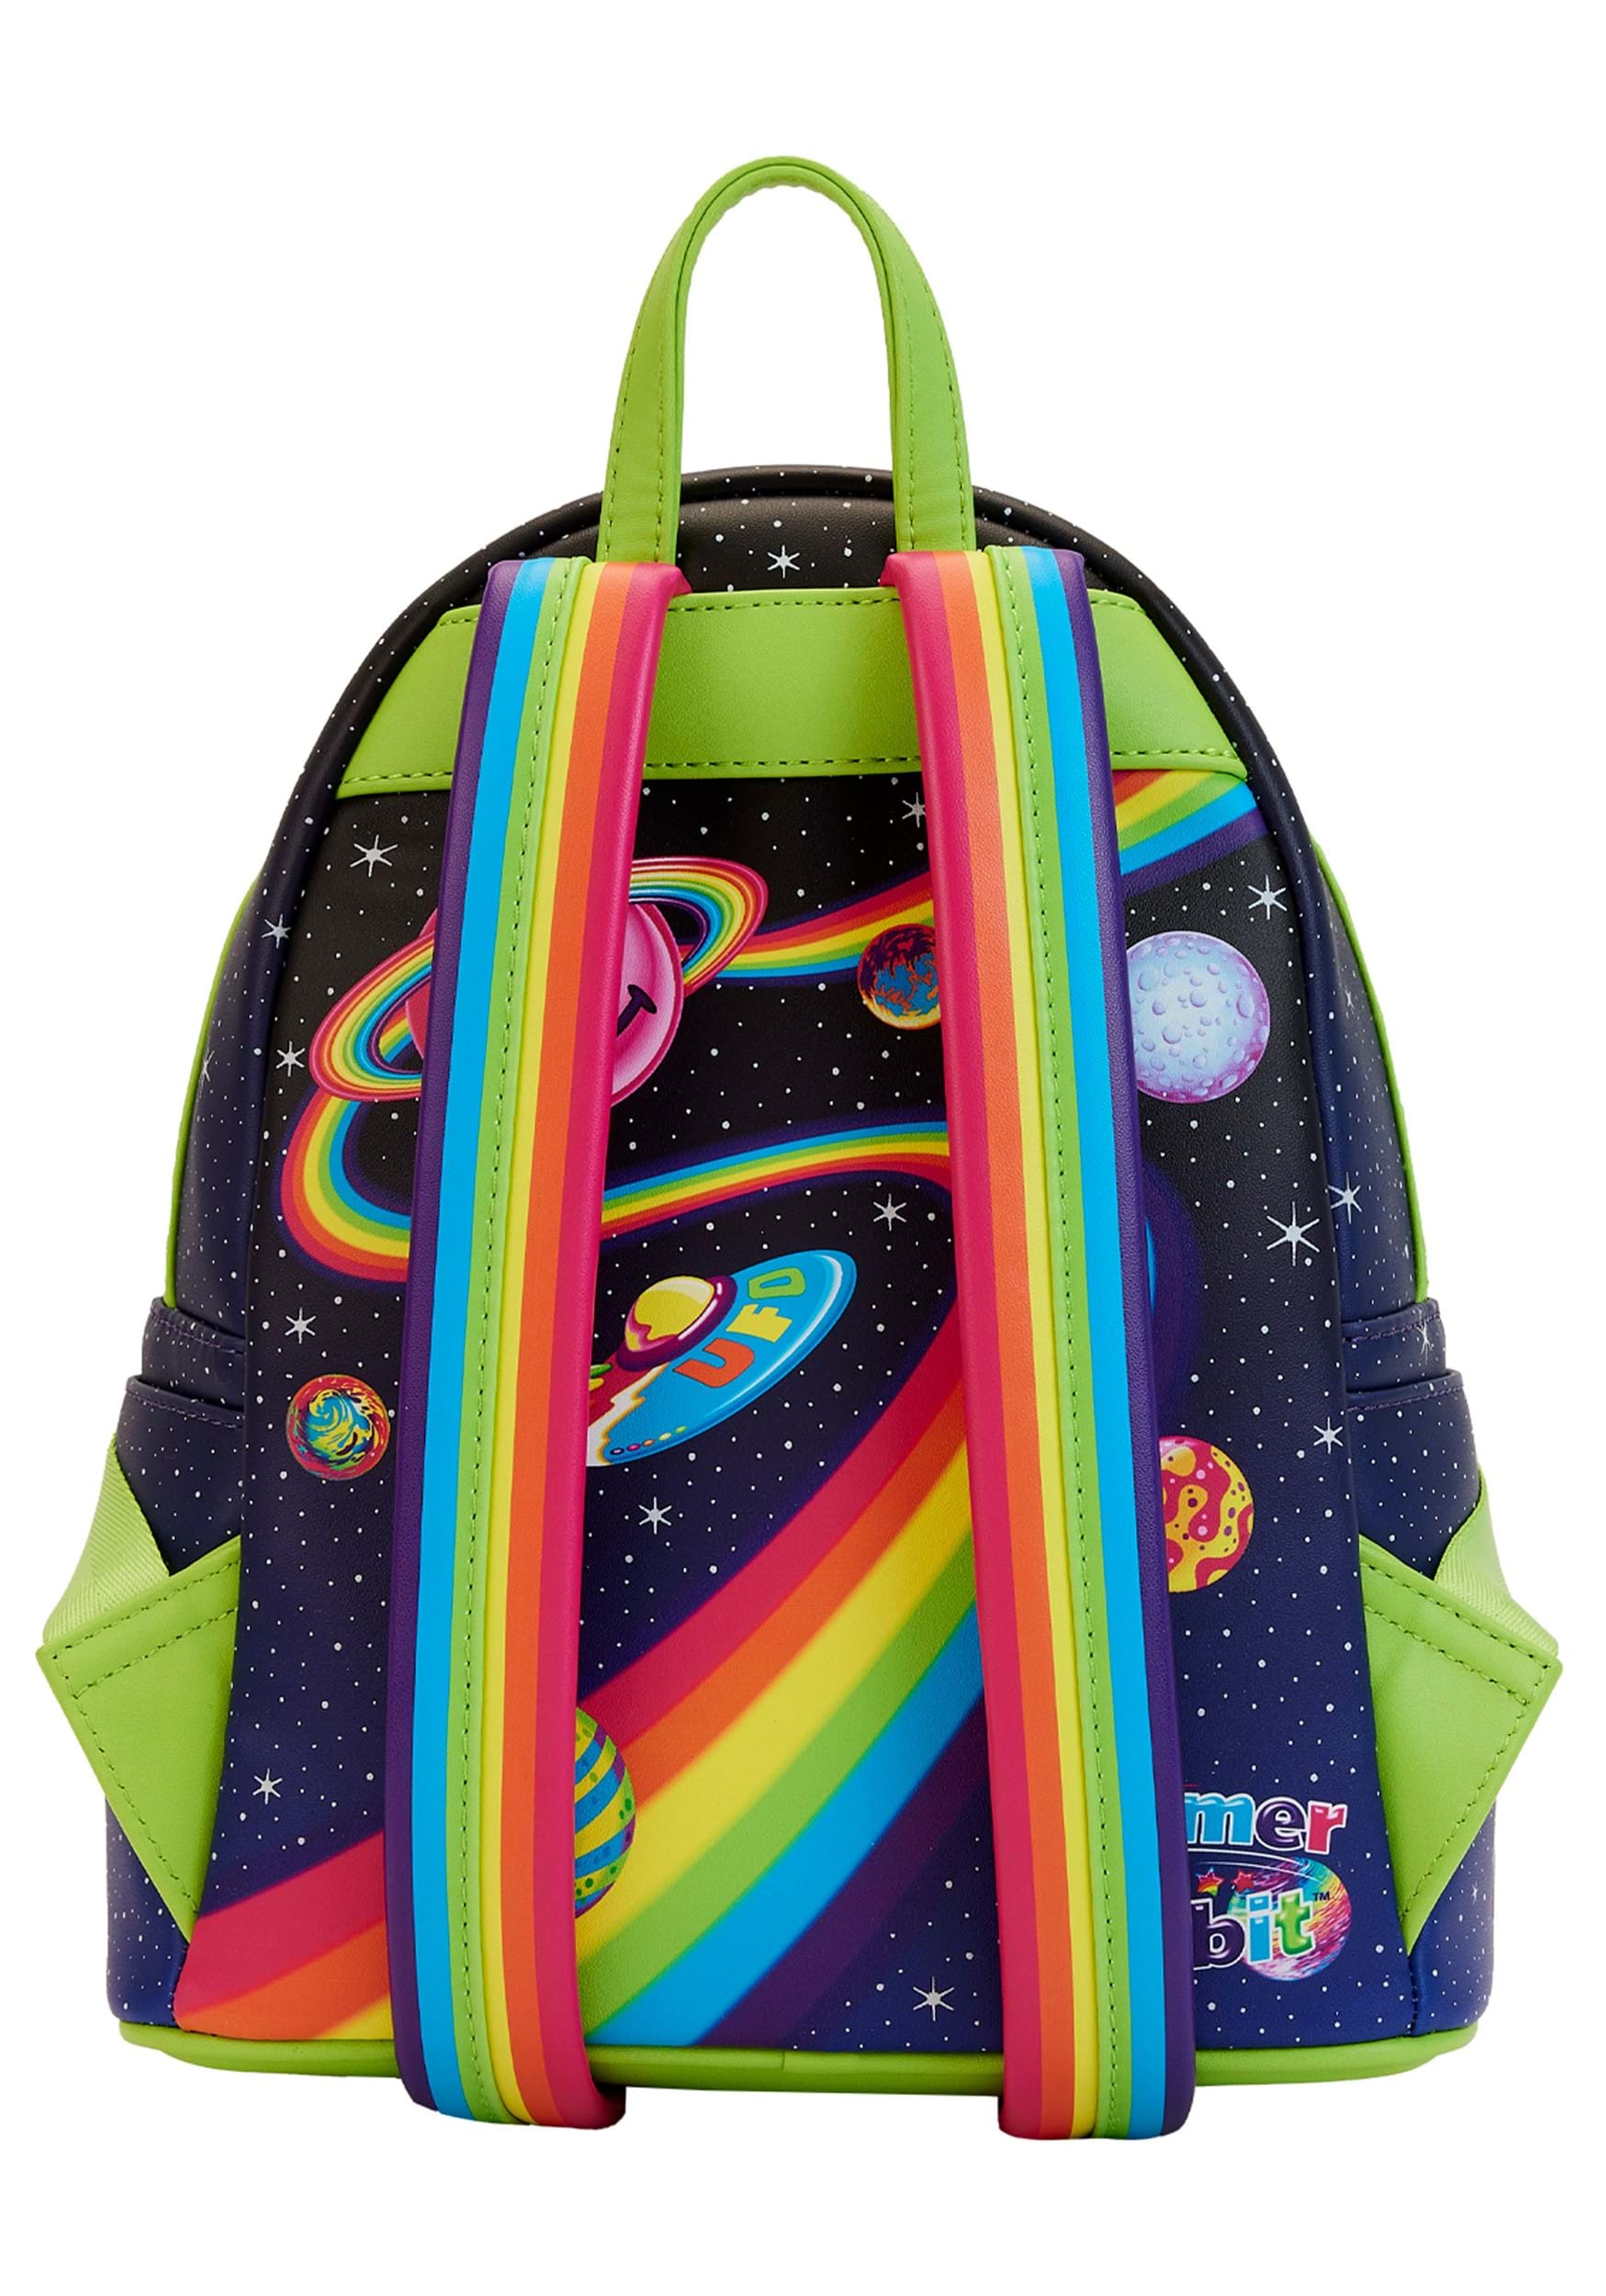 Pack it Freezable Lunch Sack- Cosmic Rainbows